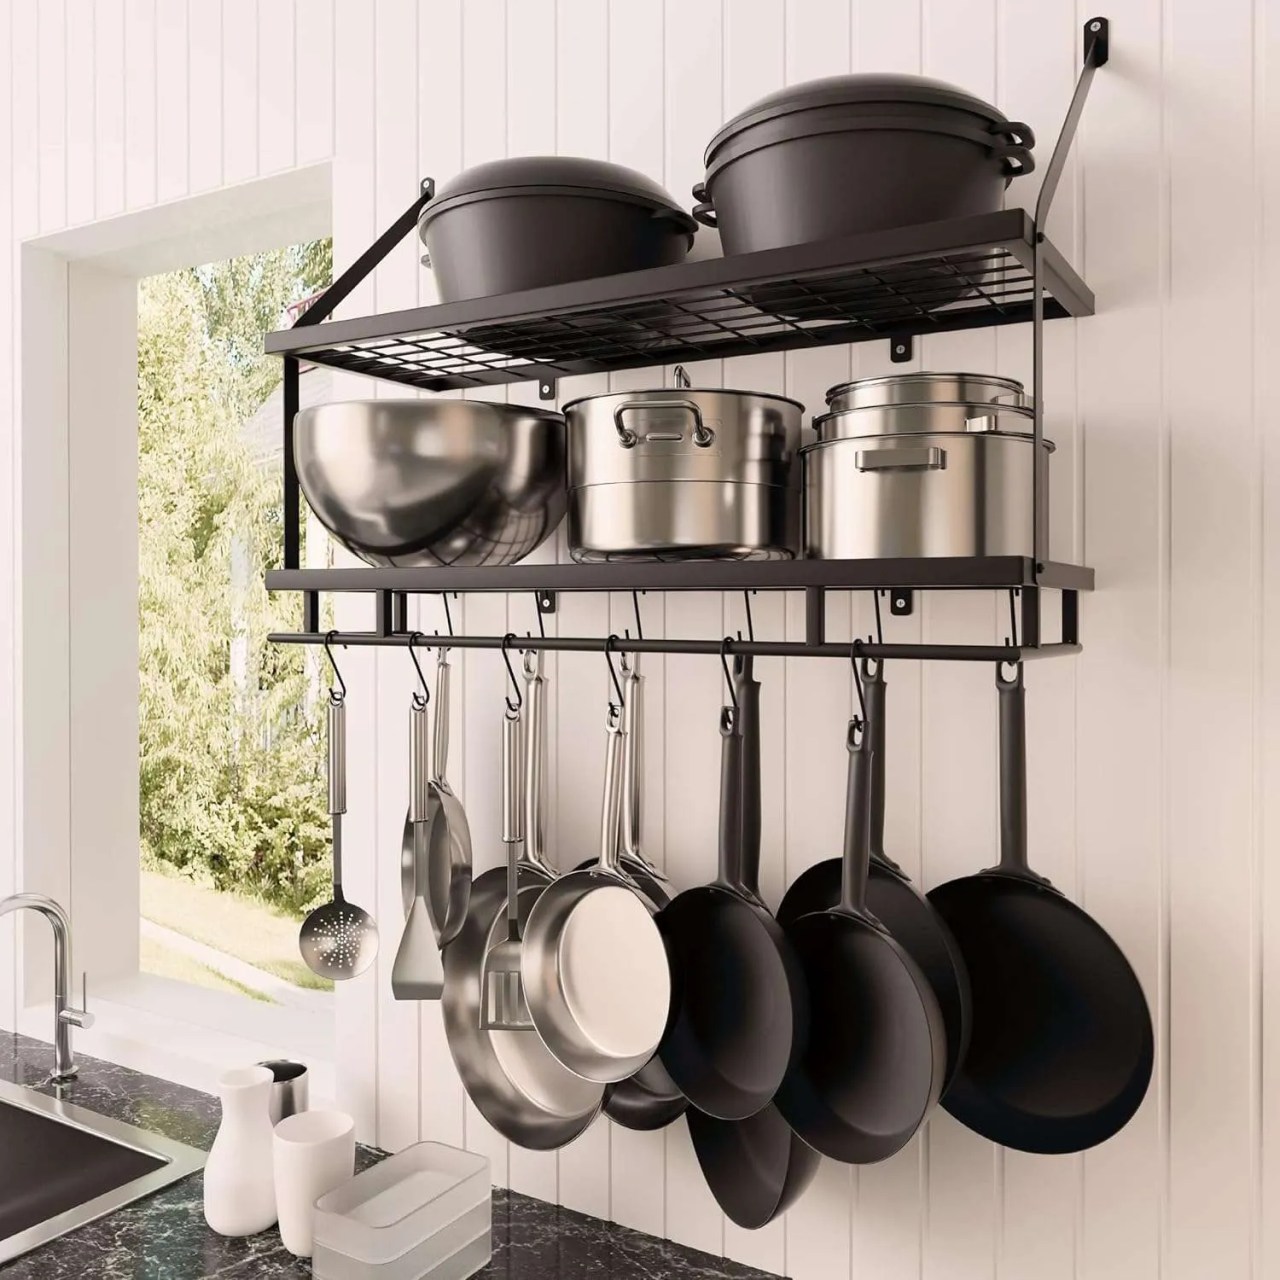 pots and pans rack in the kitchen